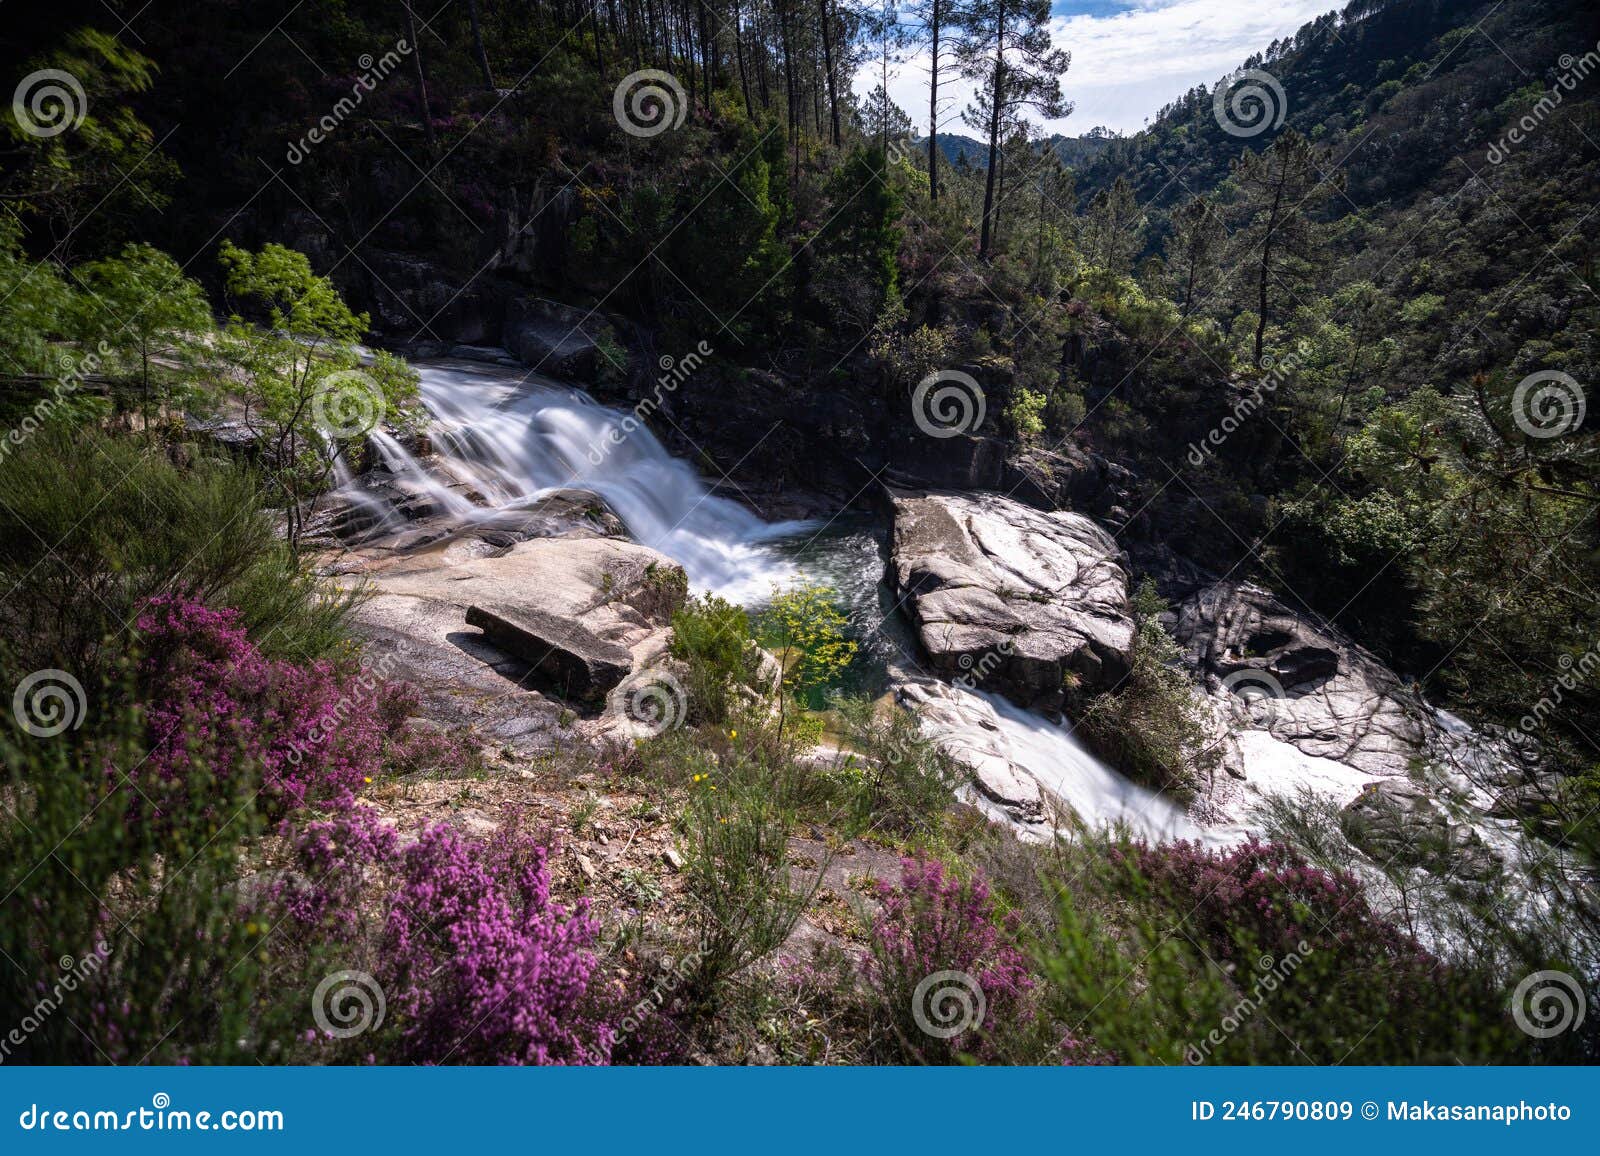 view of the cascata fecha de barjas waterfalls in the peneda-geres national park in portugal